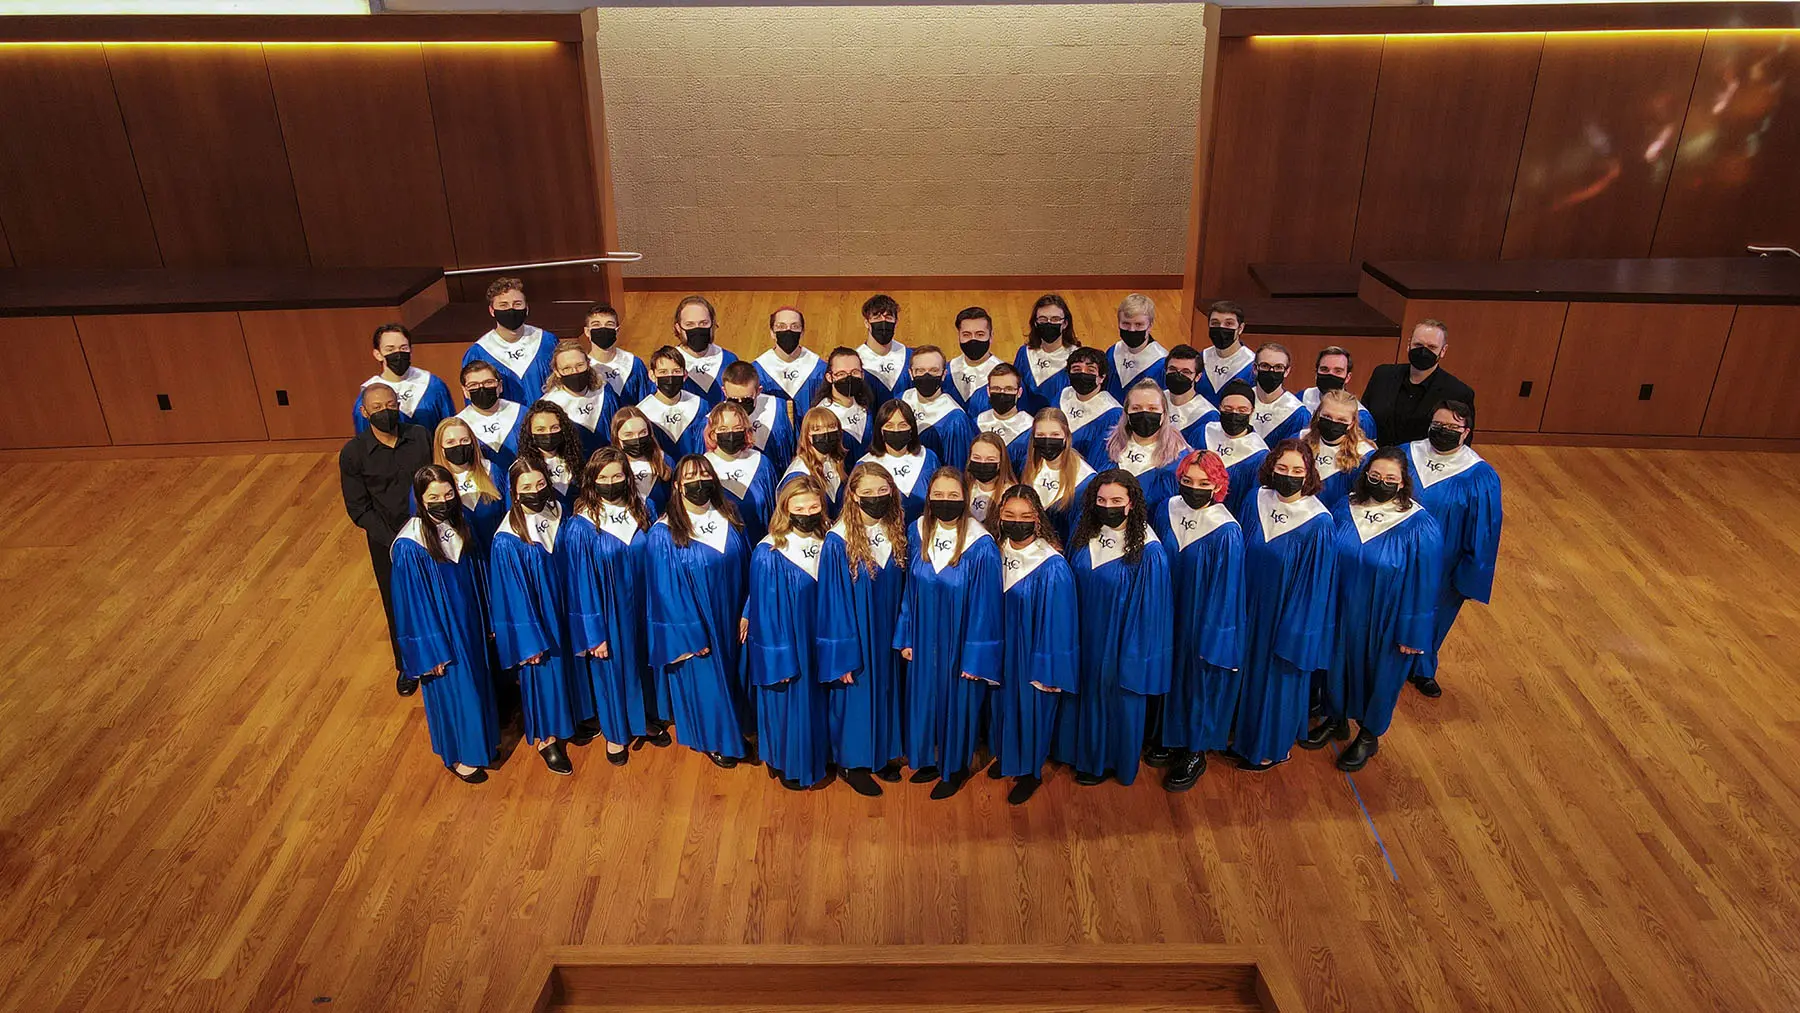 Choir standing in robes on stage